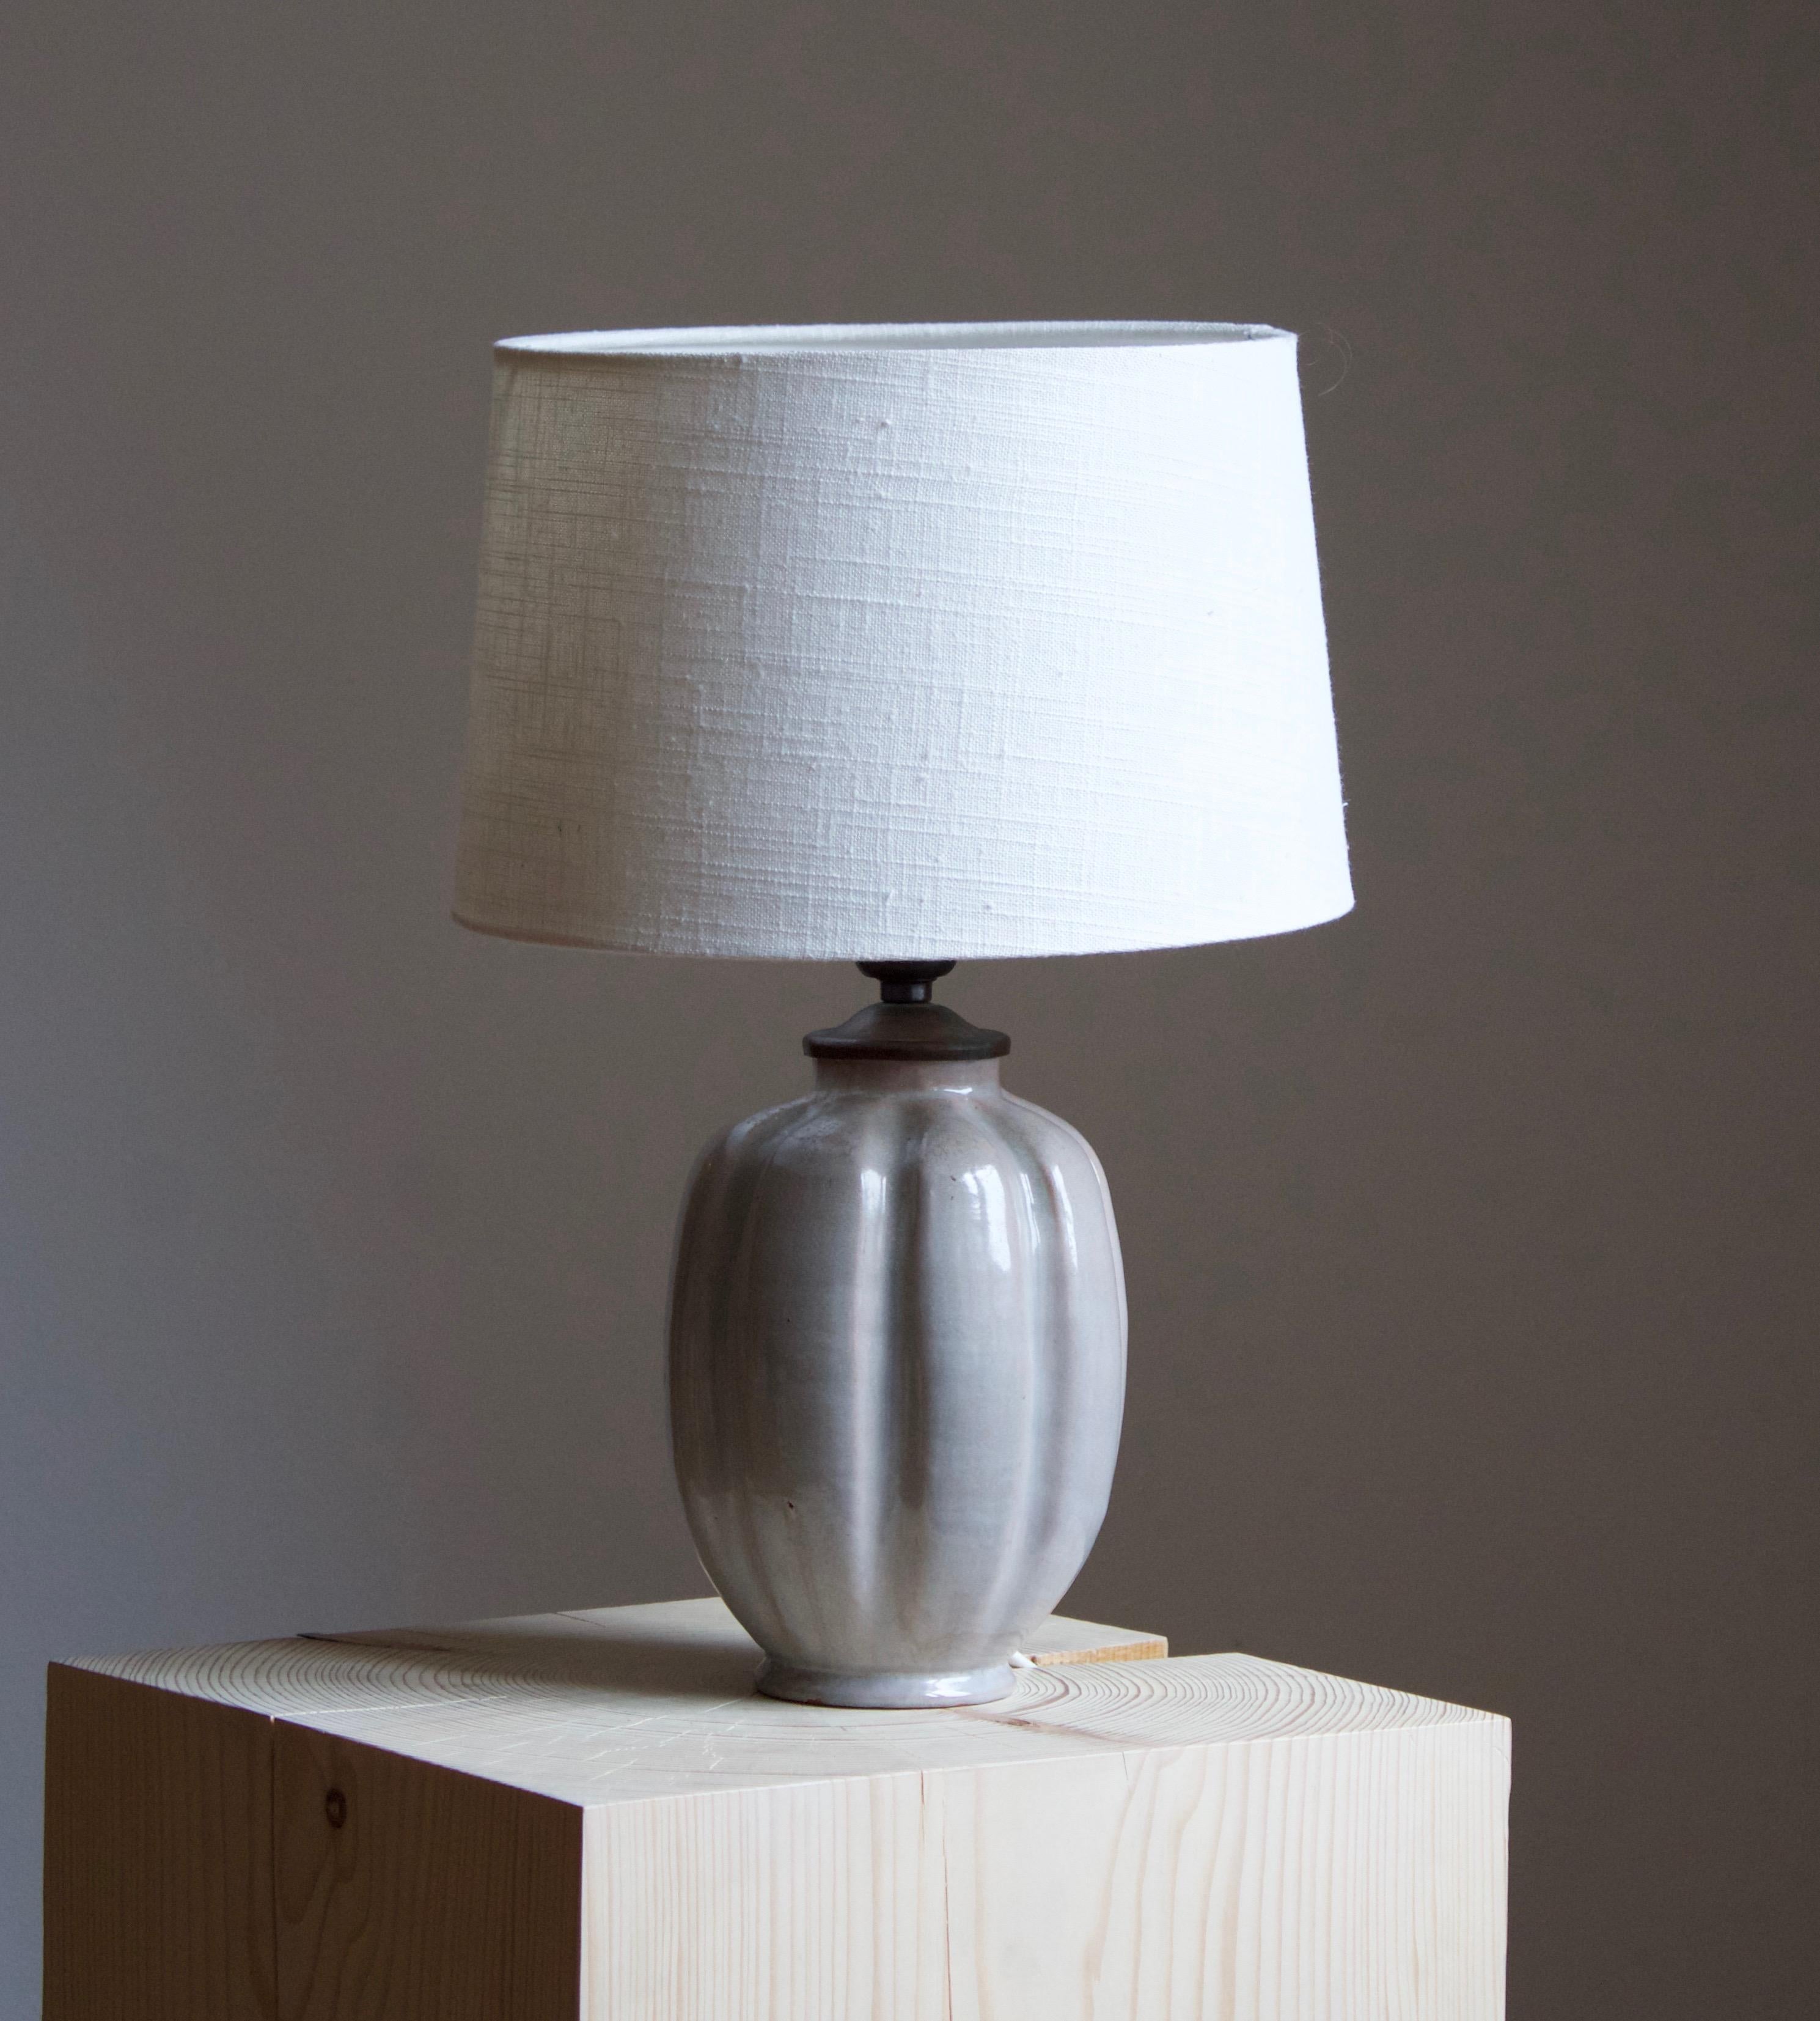 A produced by Nittsjö, Sweden, 1930s.

Stated dimensions exclude the lampshade. Height includes socket. Sold without lampshade.

Other designers of the period include Axel Salto, Paavo Tynell, Lisa Johansson-Pape, Carl-Harry Stålhane, and Gunnar